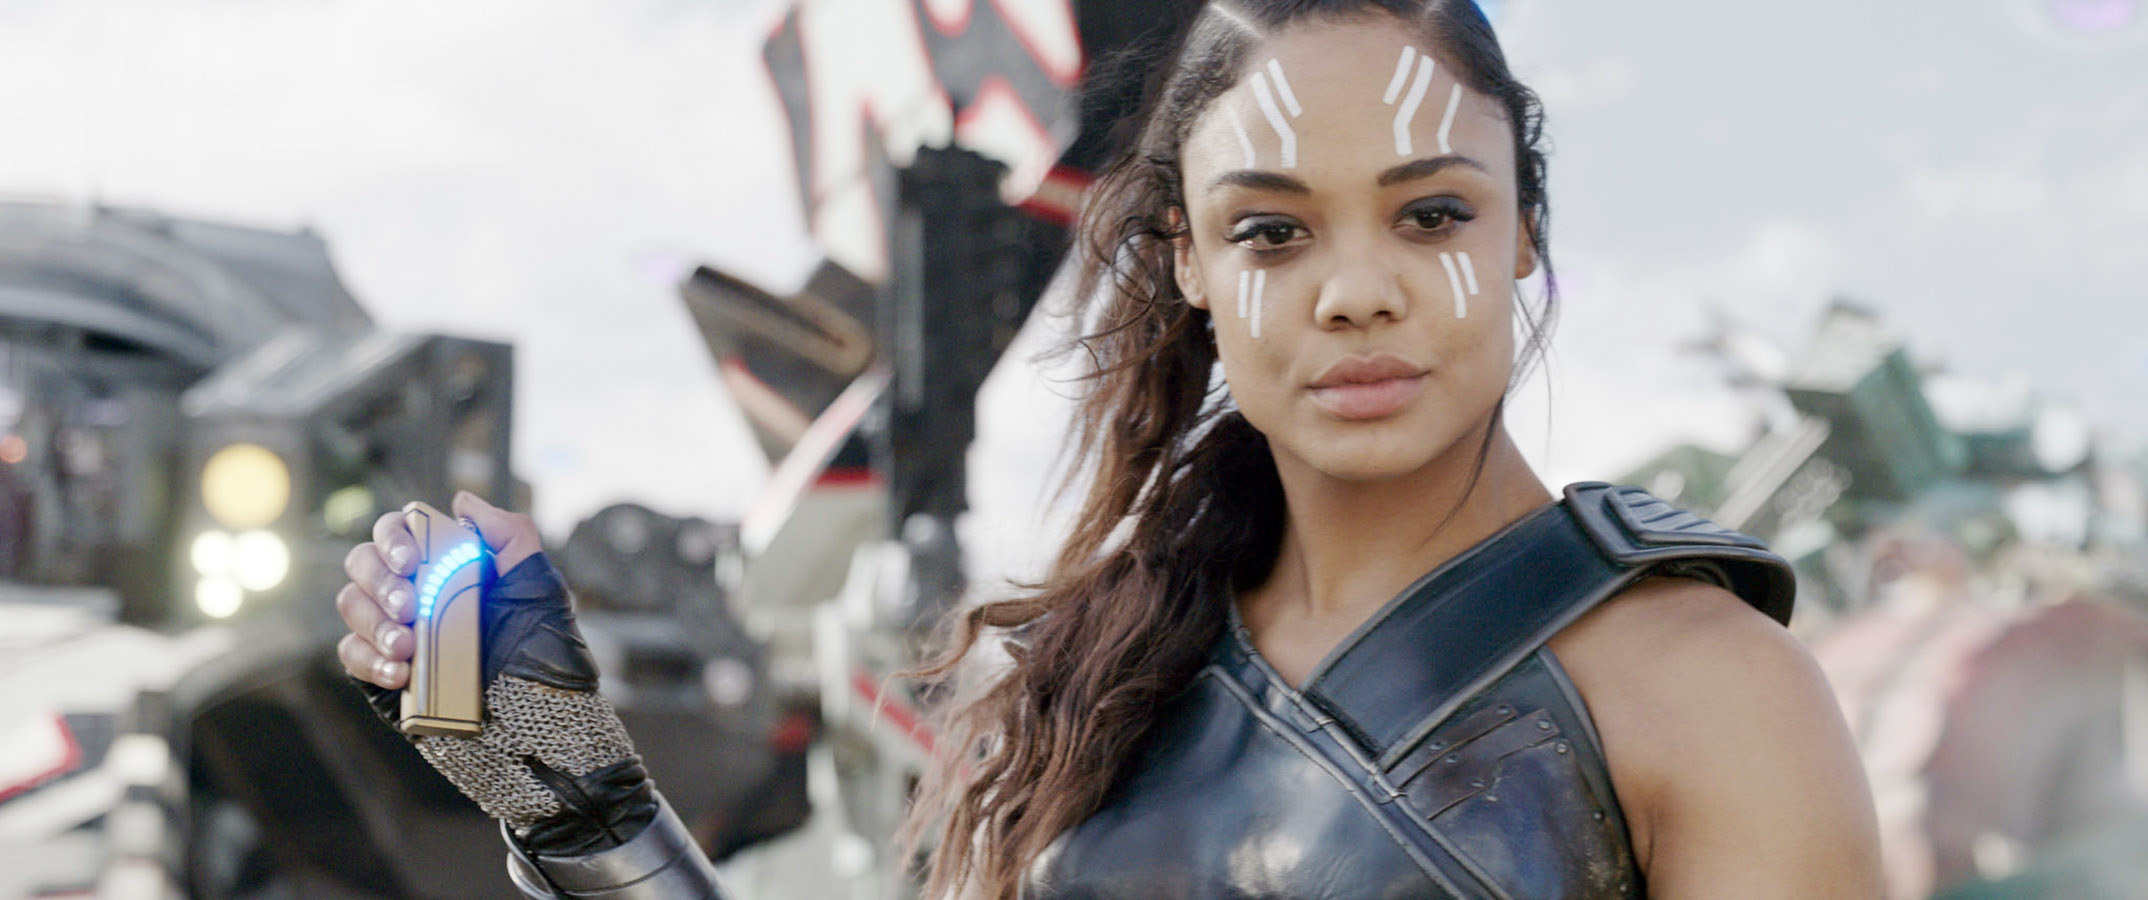 valkyrie in the film